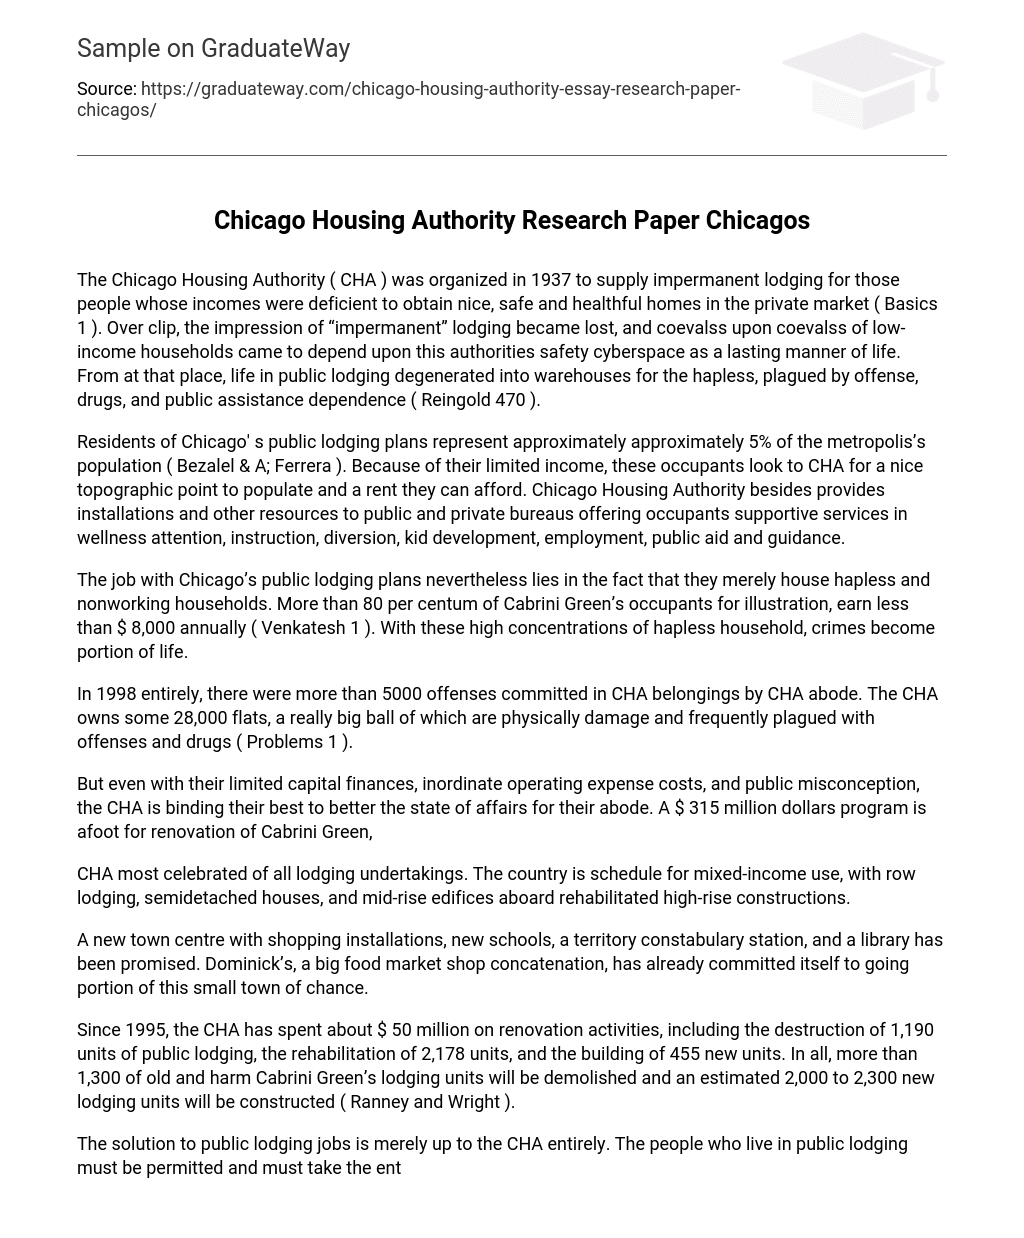 Chicago Housing Authority Research Paper Chicagos